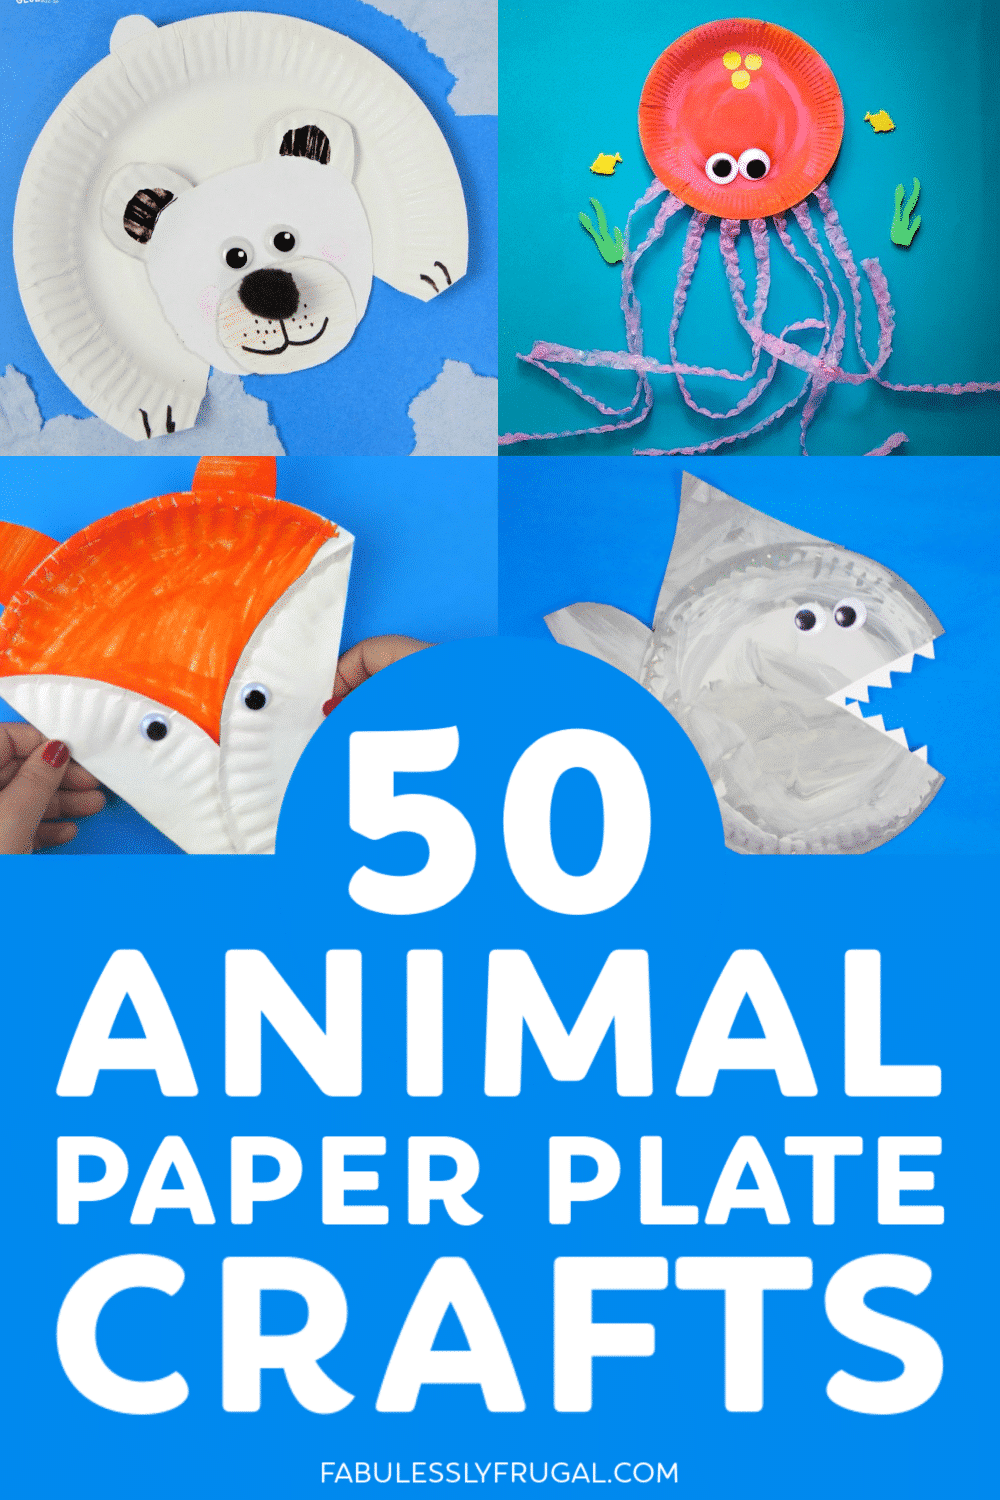 Animal paper plate crafts